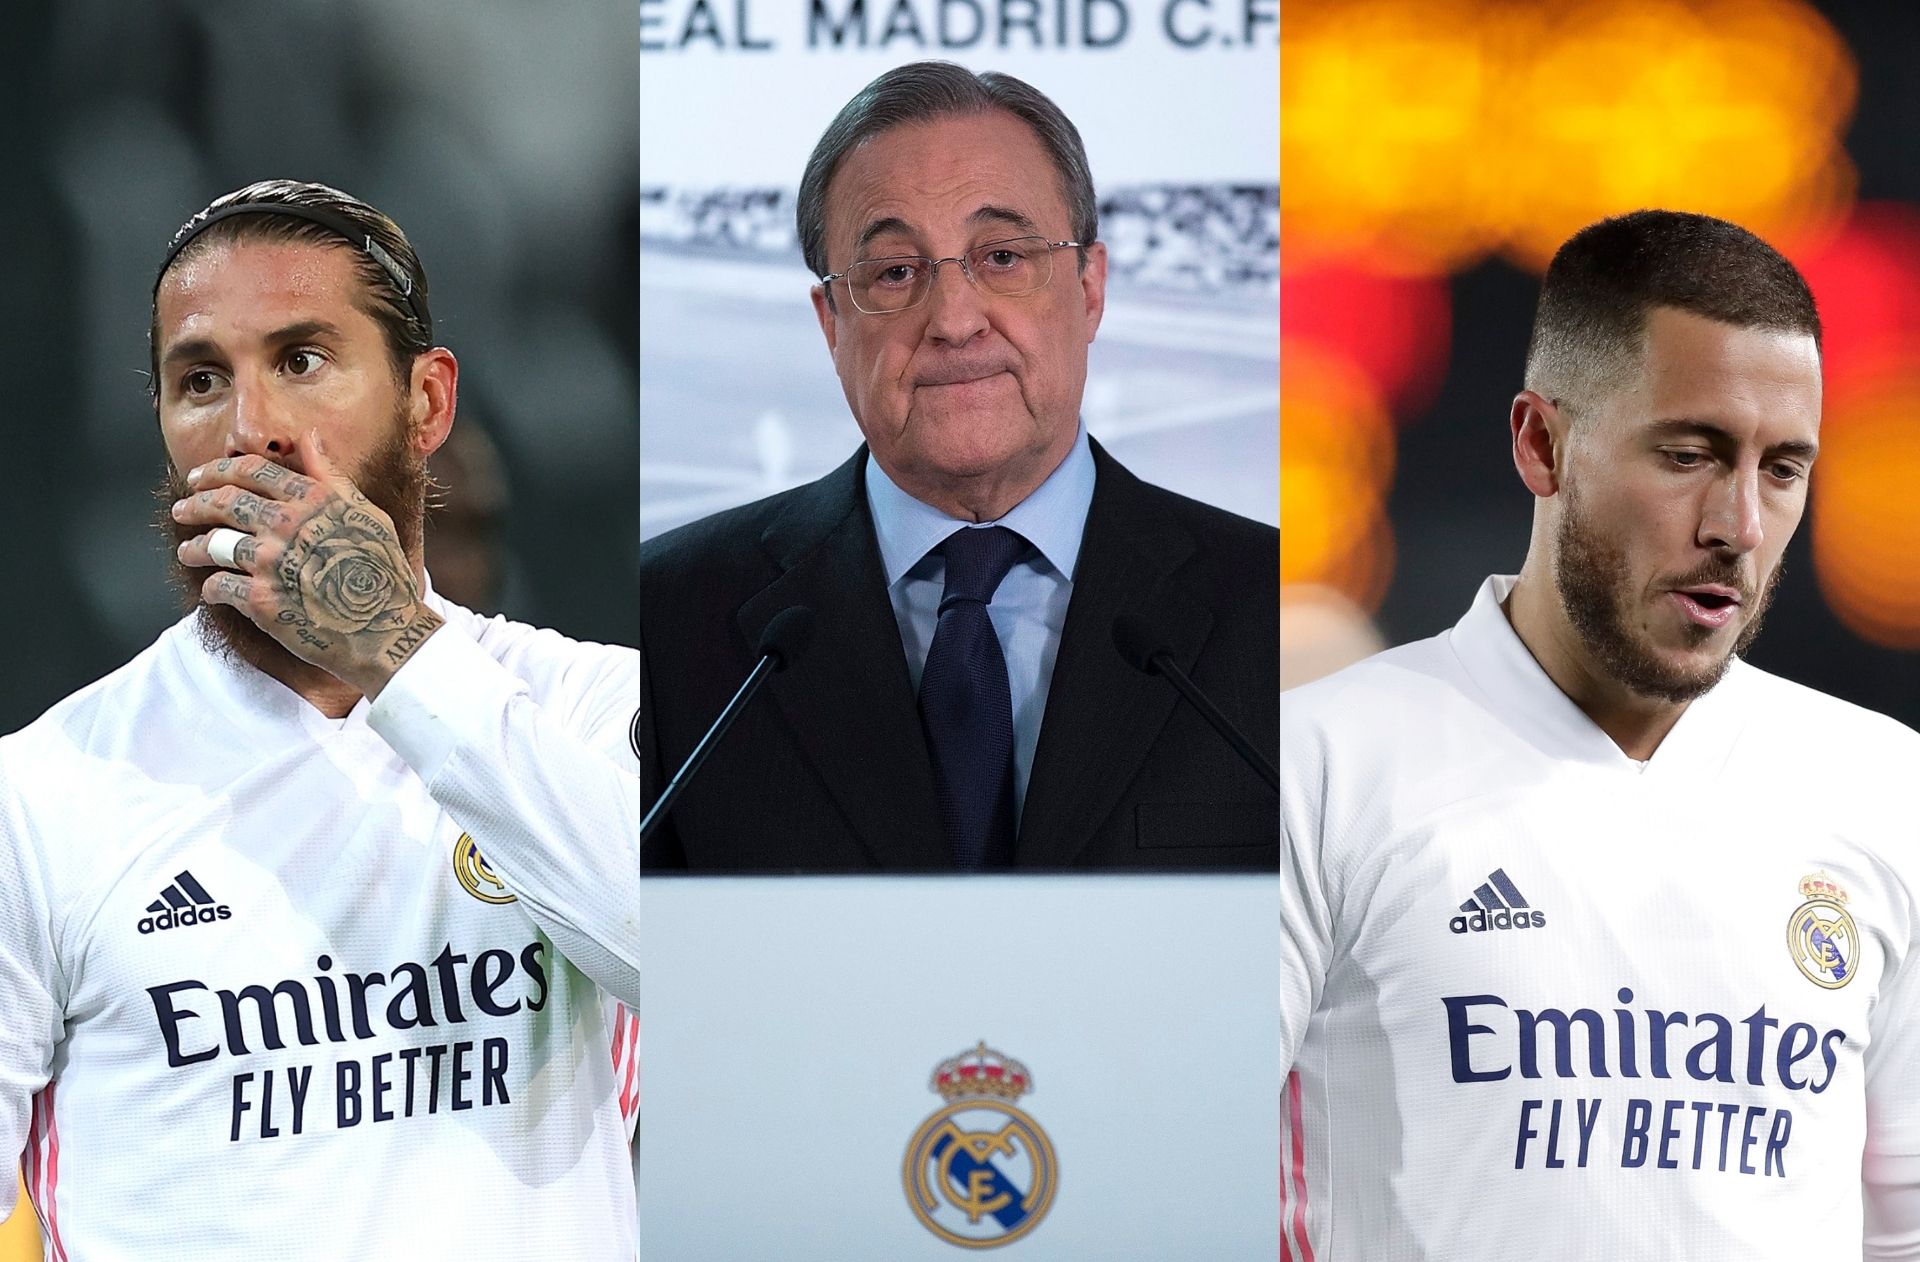 Sunday's transfer rumors Real Madrid plan to offload 6 players